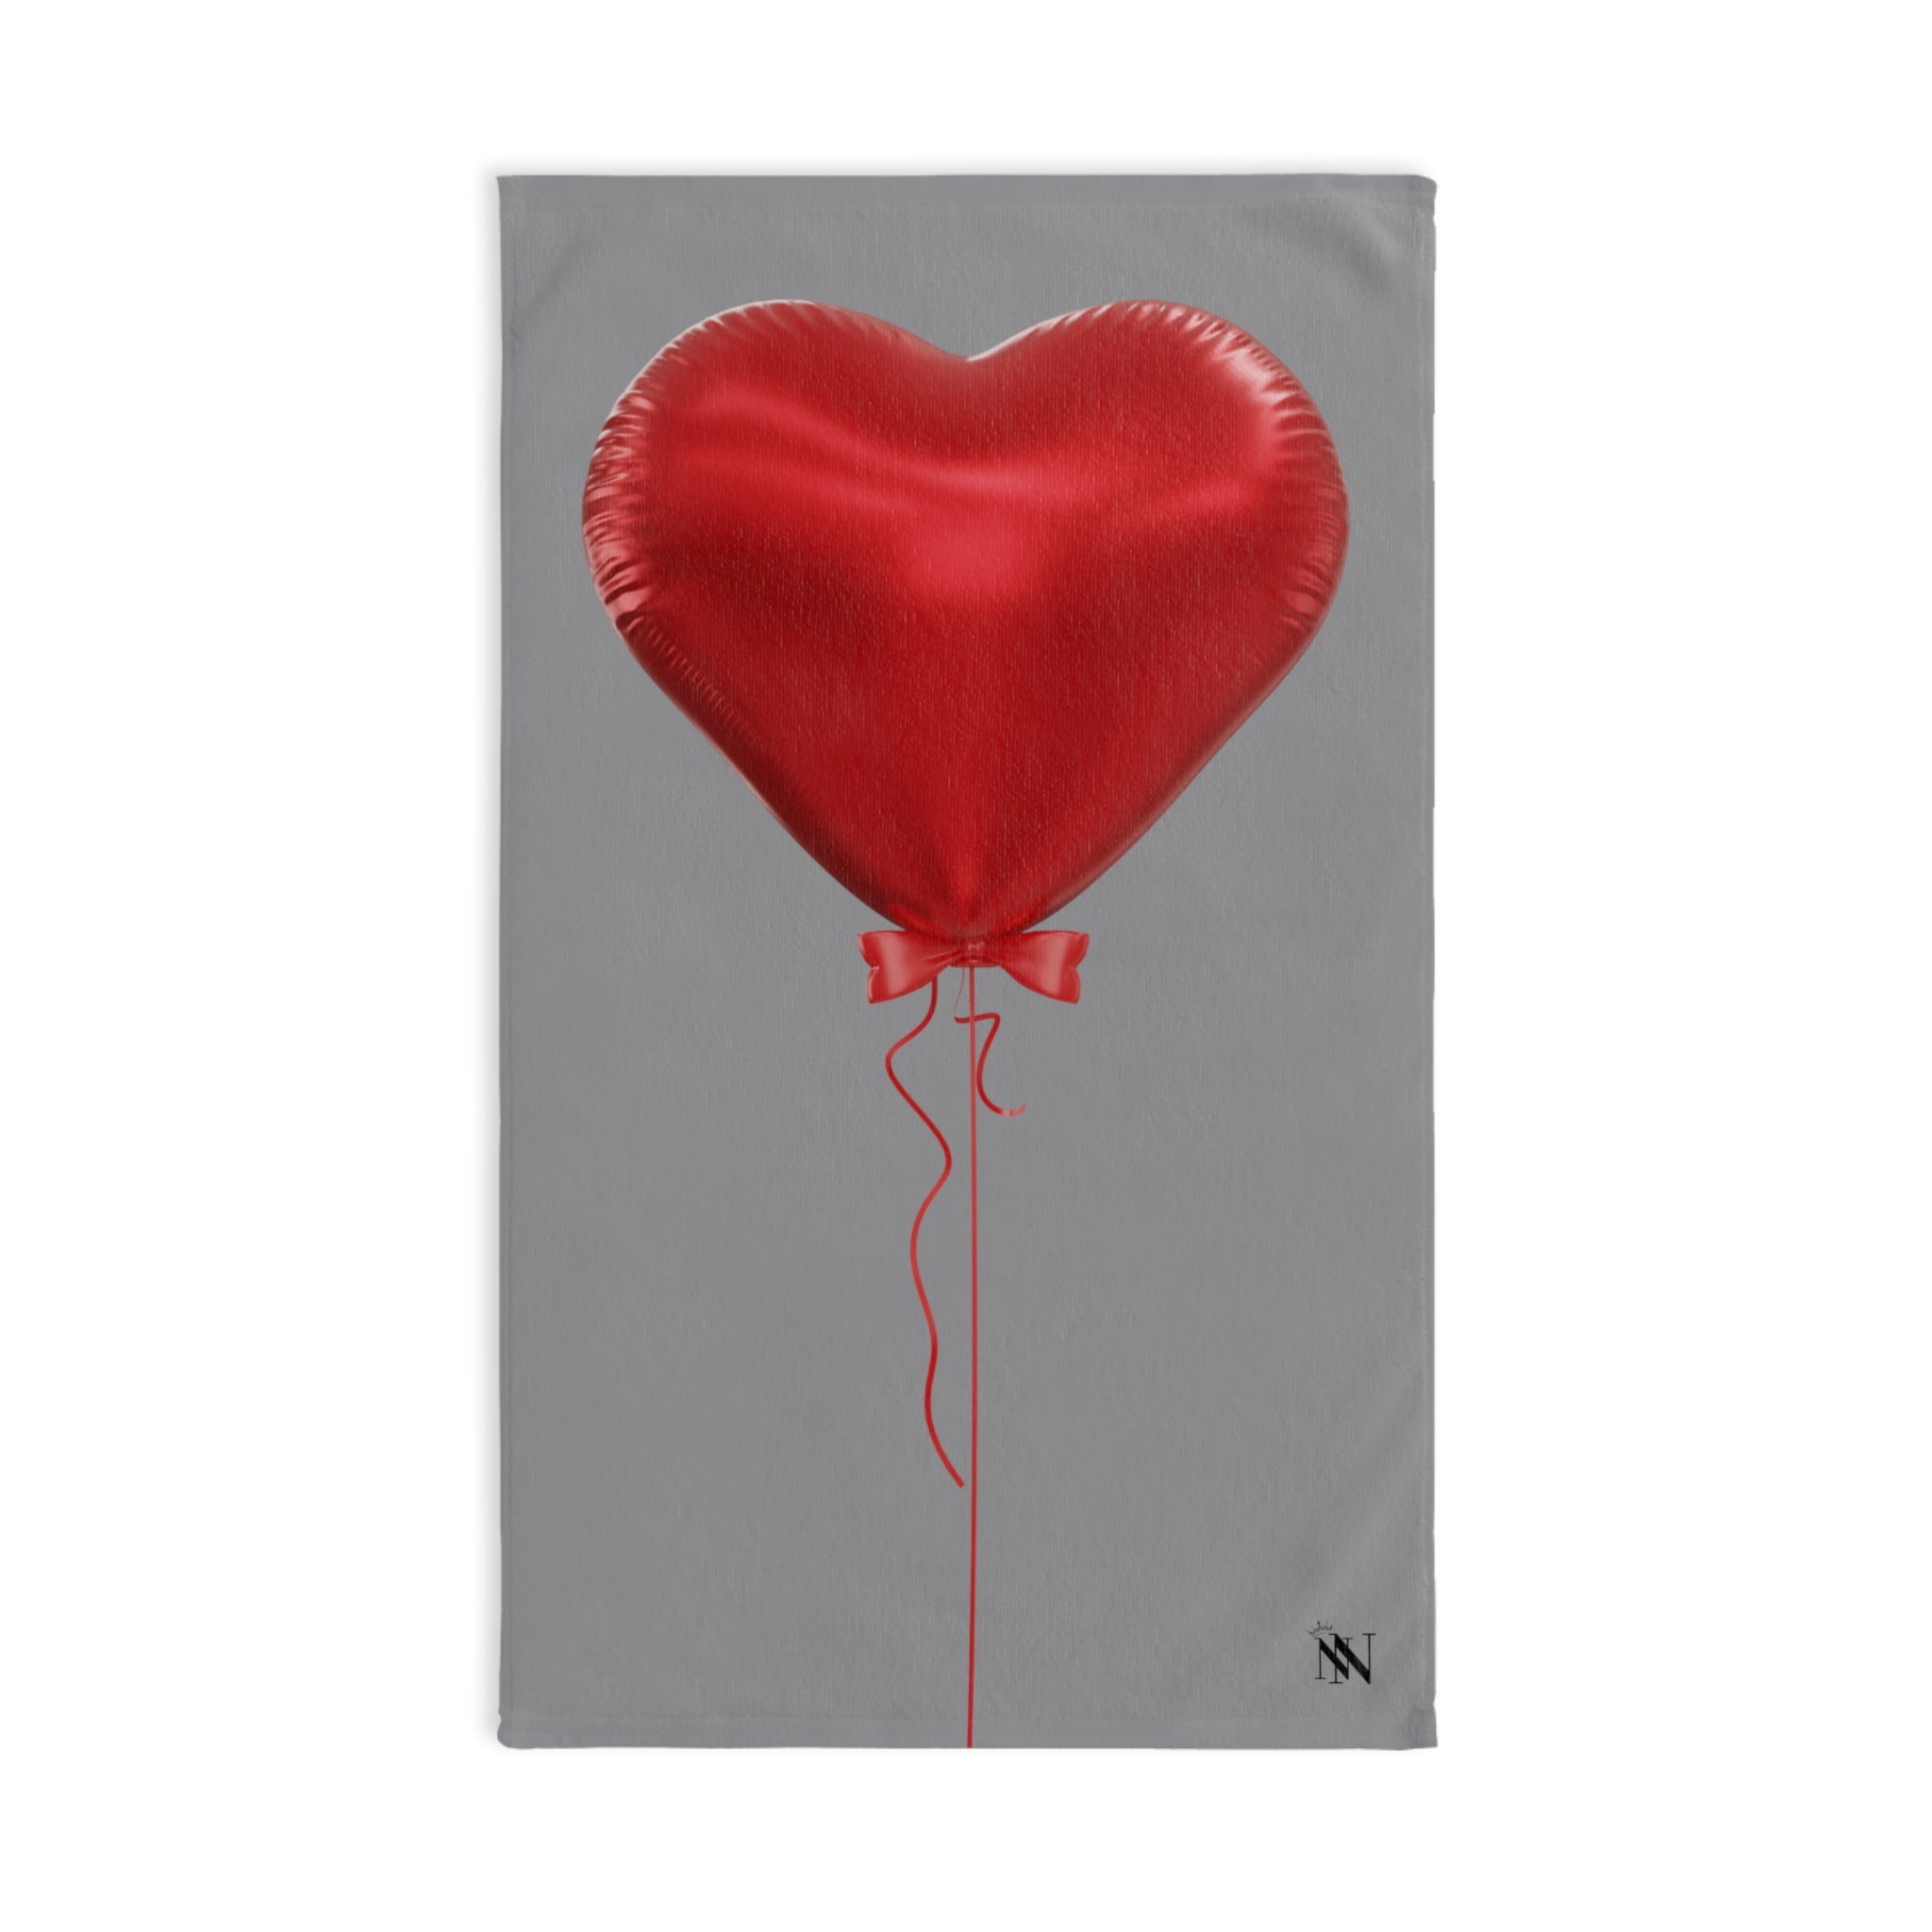 Red Balloon 3D Grey | Anniversary Wedding, Christmas, Valentines Day, Birthday Gifts for Him, Her, Romantic Gifts for Wife, Girlfriend, Couples Gifts for Boyfriend, Husband NECTAR NAPKINS